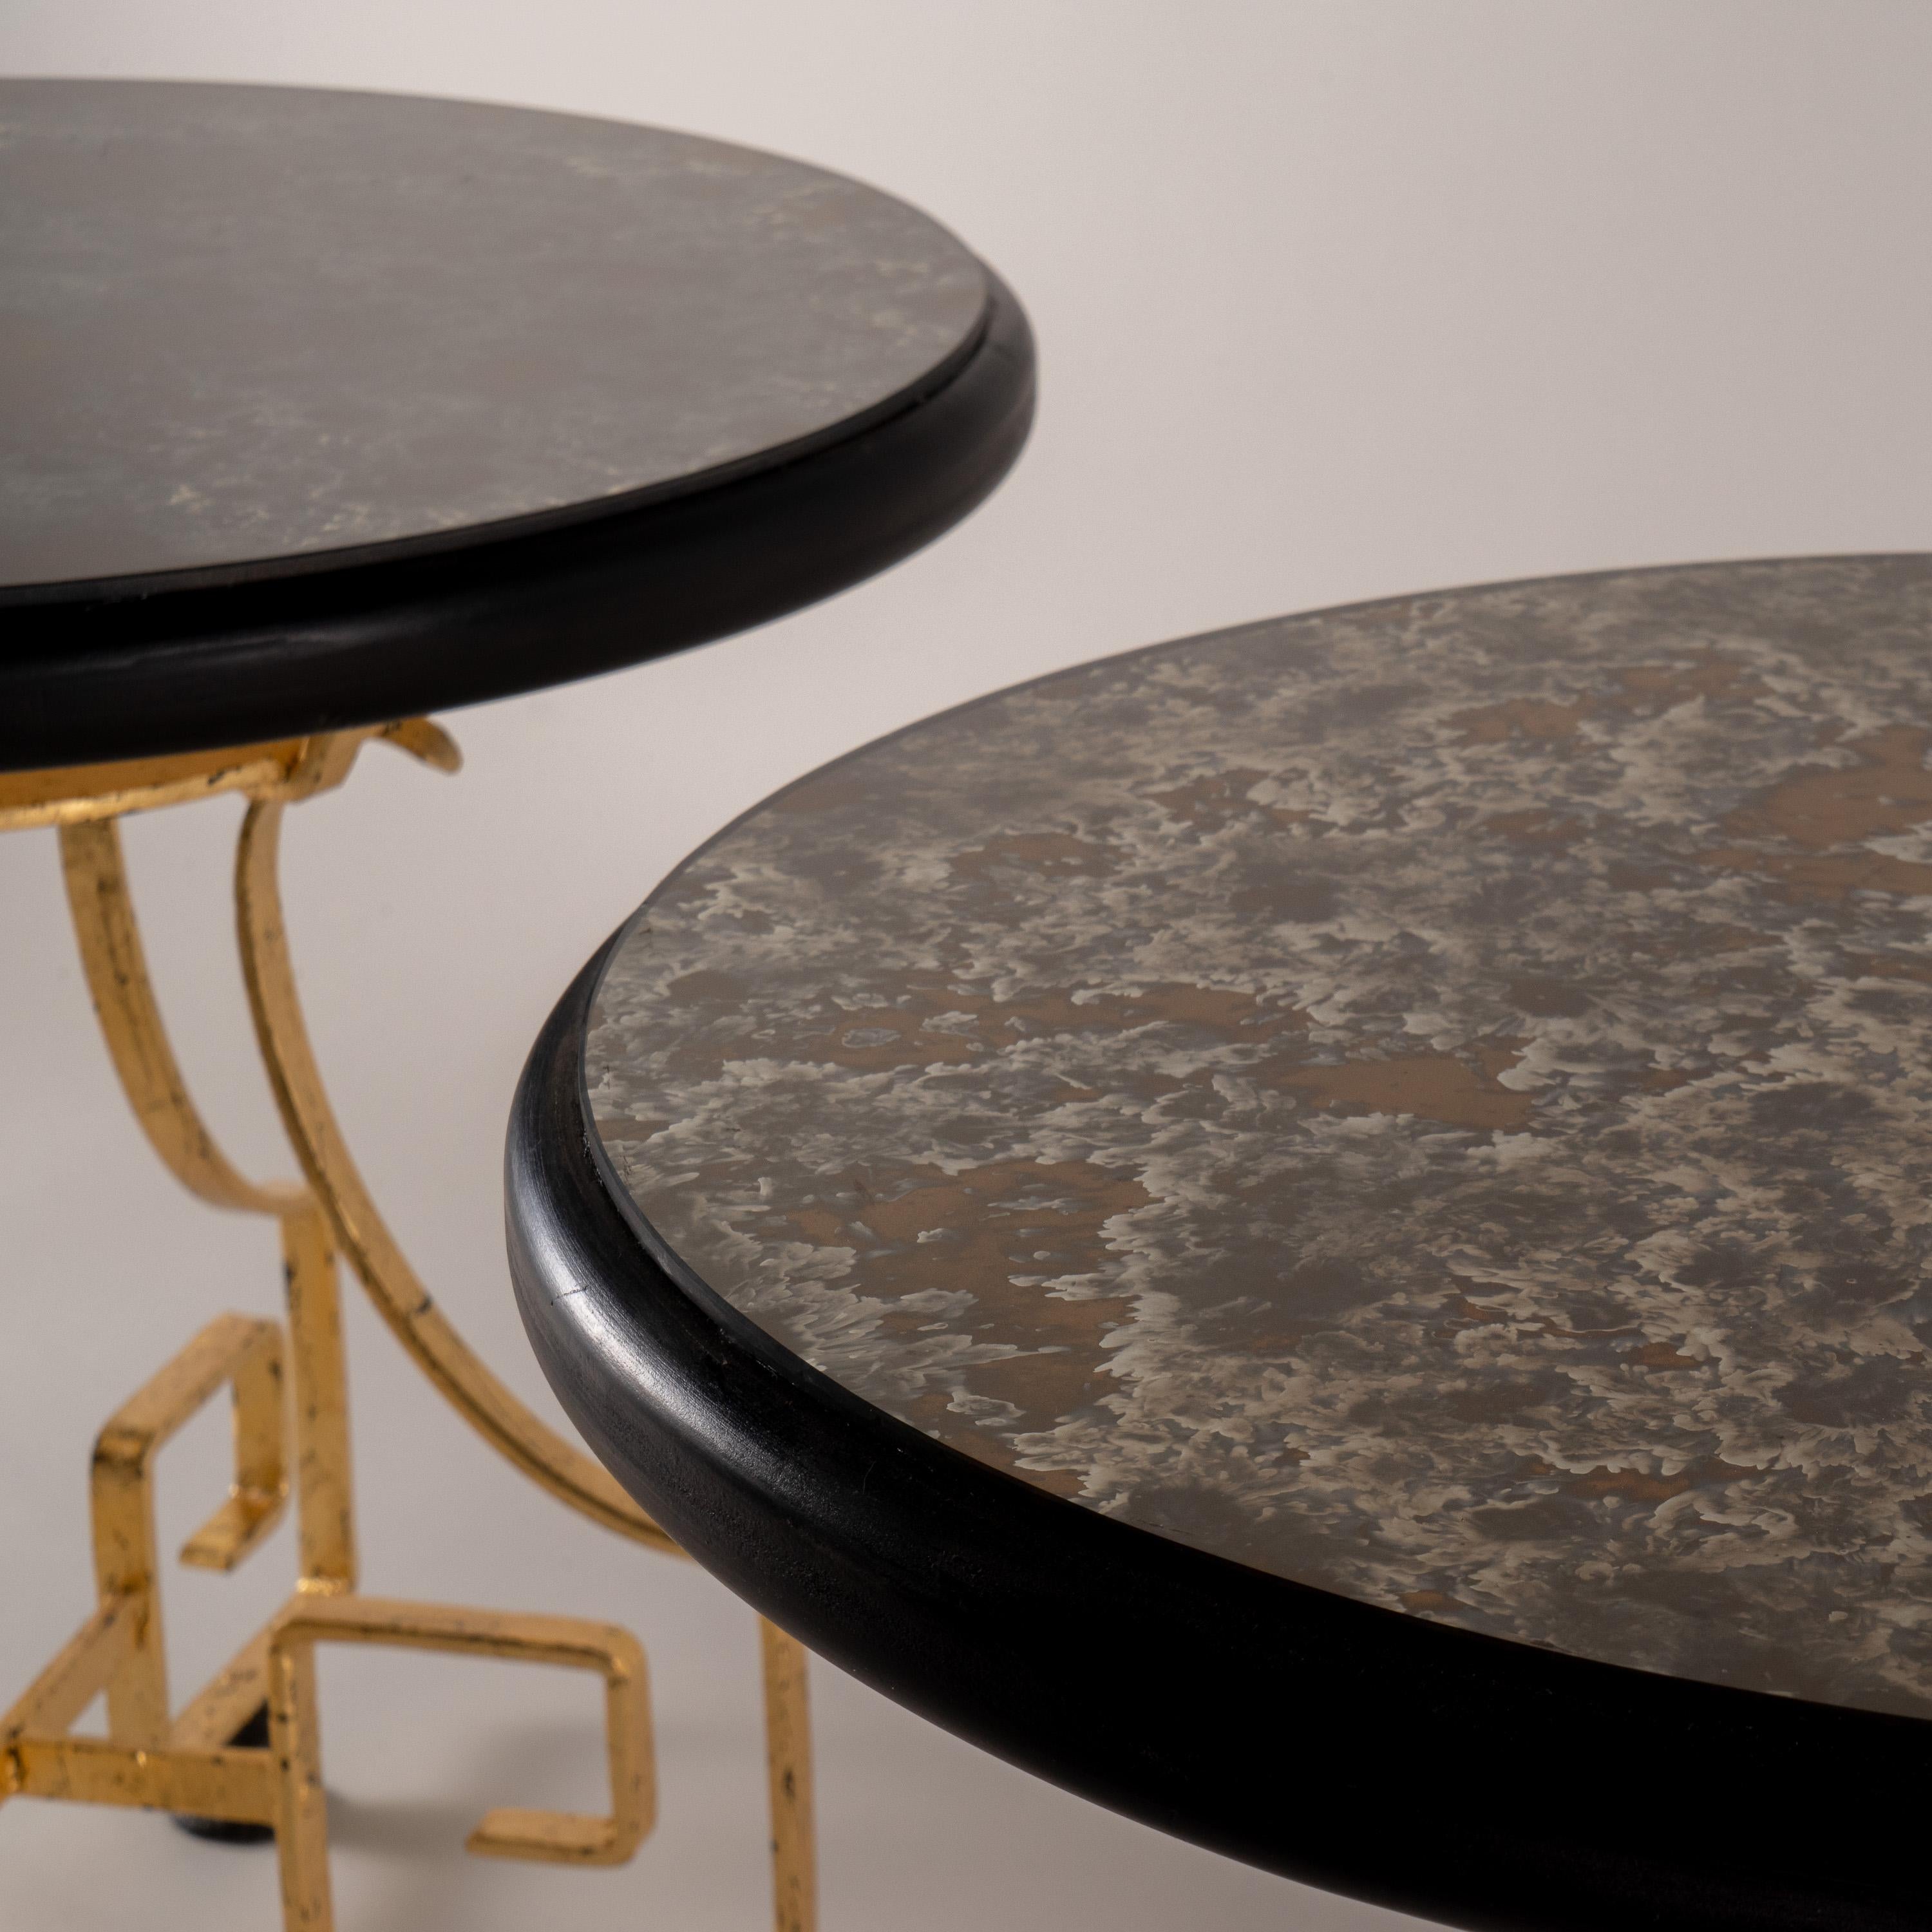 Two sturdy side tables attributed to Arturo Pani (Mexico 1915-1981) of wrought iron lacquered in black and gilded with foil. At the top, a thick wooden base lacquered in mate black and attached to it a rounded acid-stained mirrored glass. The iron